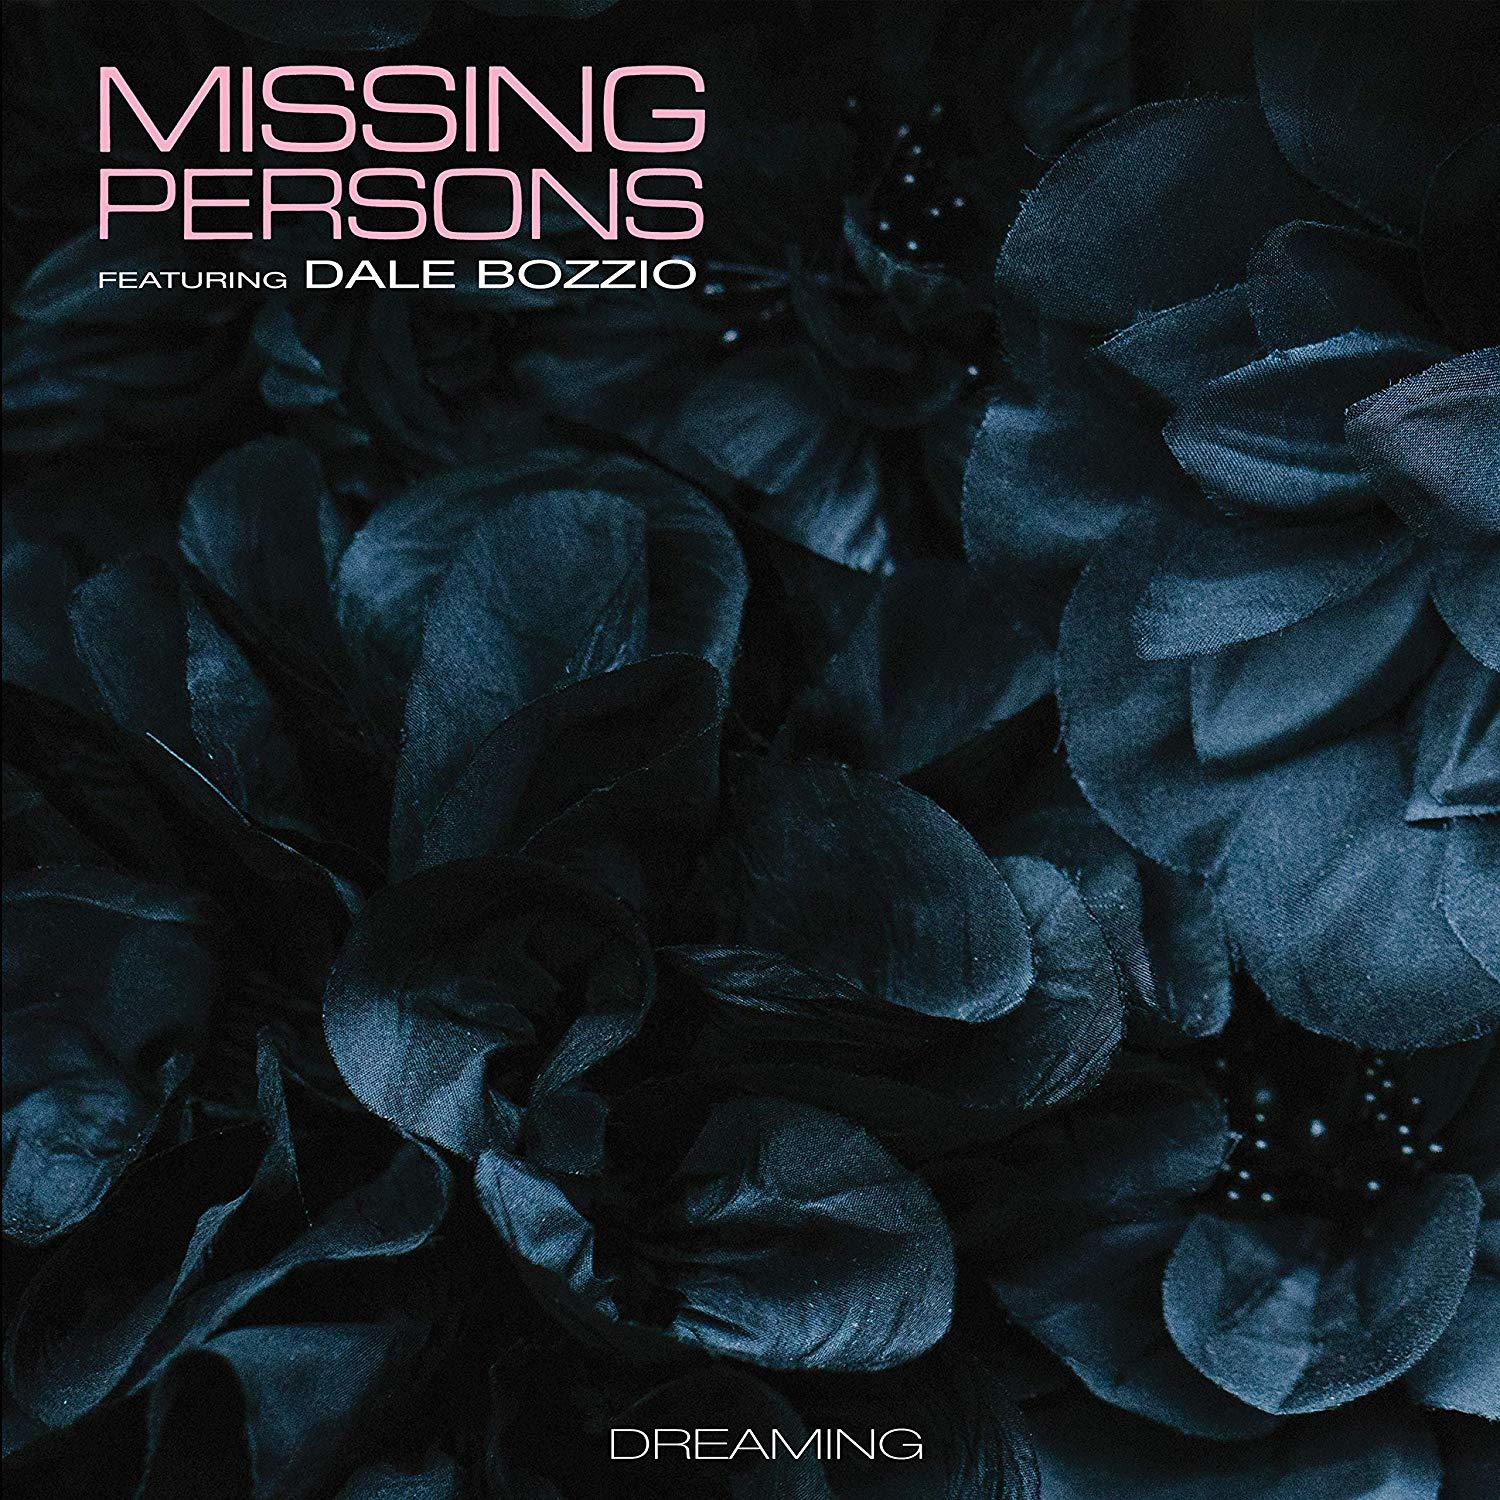 DALE DREAMING PERSONS BOZZIO - (CD) - FEAT. MISSING